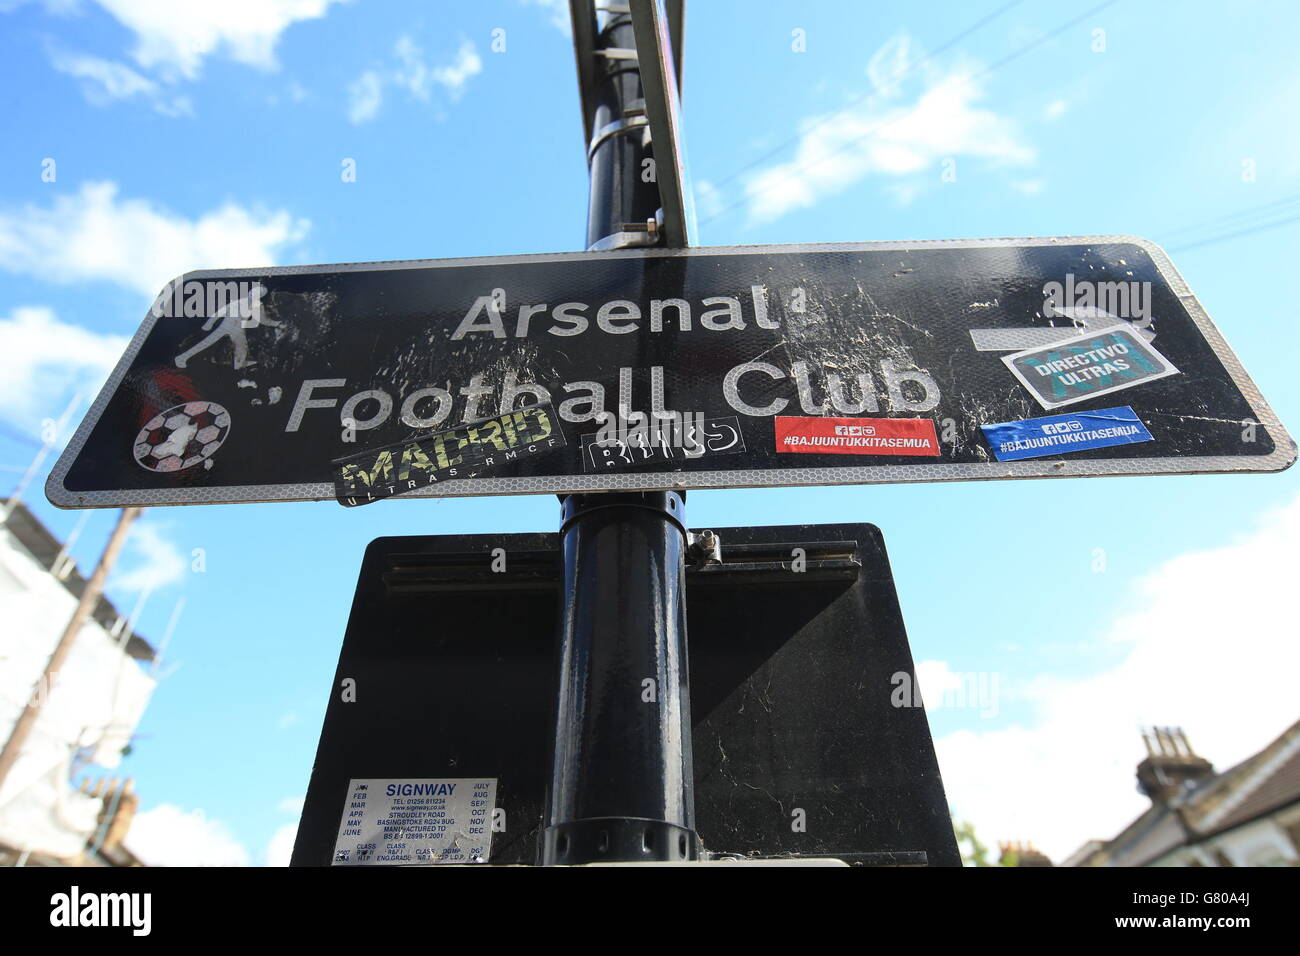 Soccer - Barclays Premier League - Arsenal v Sunderland - Emirates Stadium. A general view of a road sign pointing the way to Arsenal FC before the Barclays Premier League match at the Emirates Stadium, London. Stock Photo